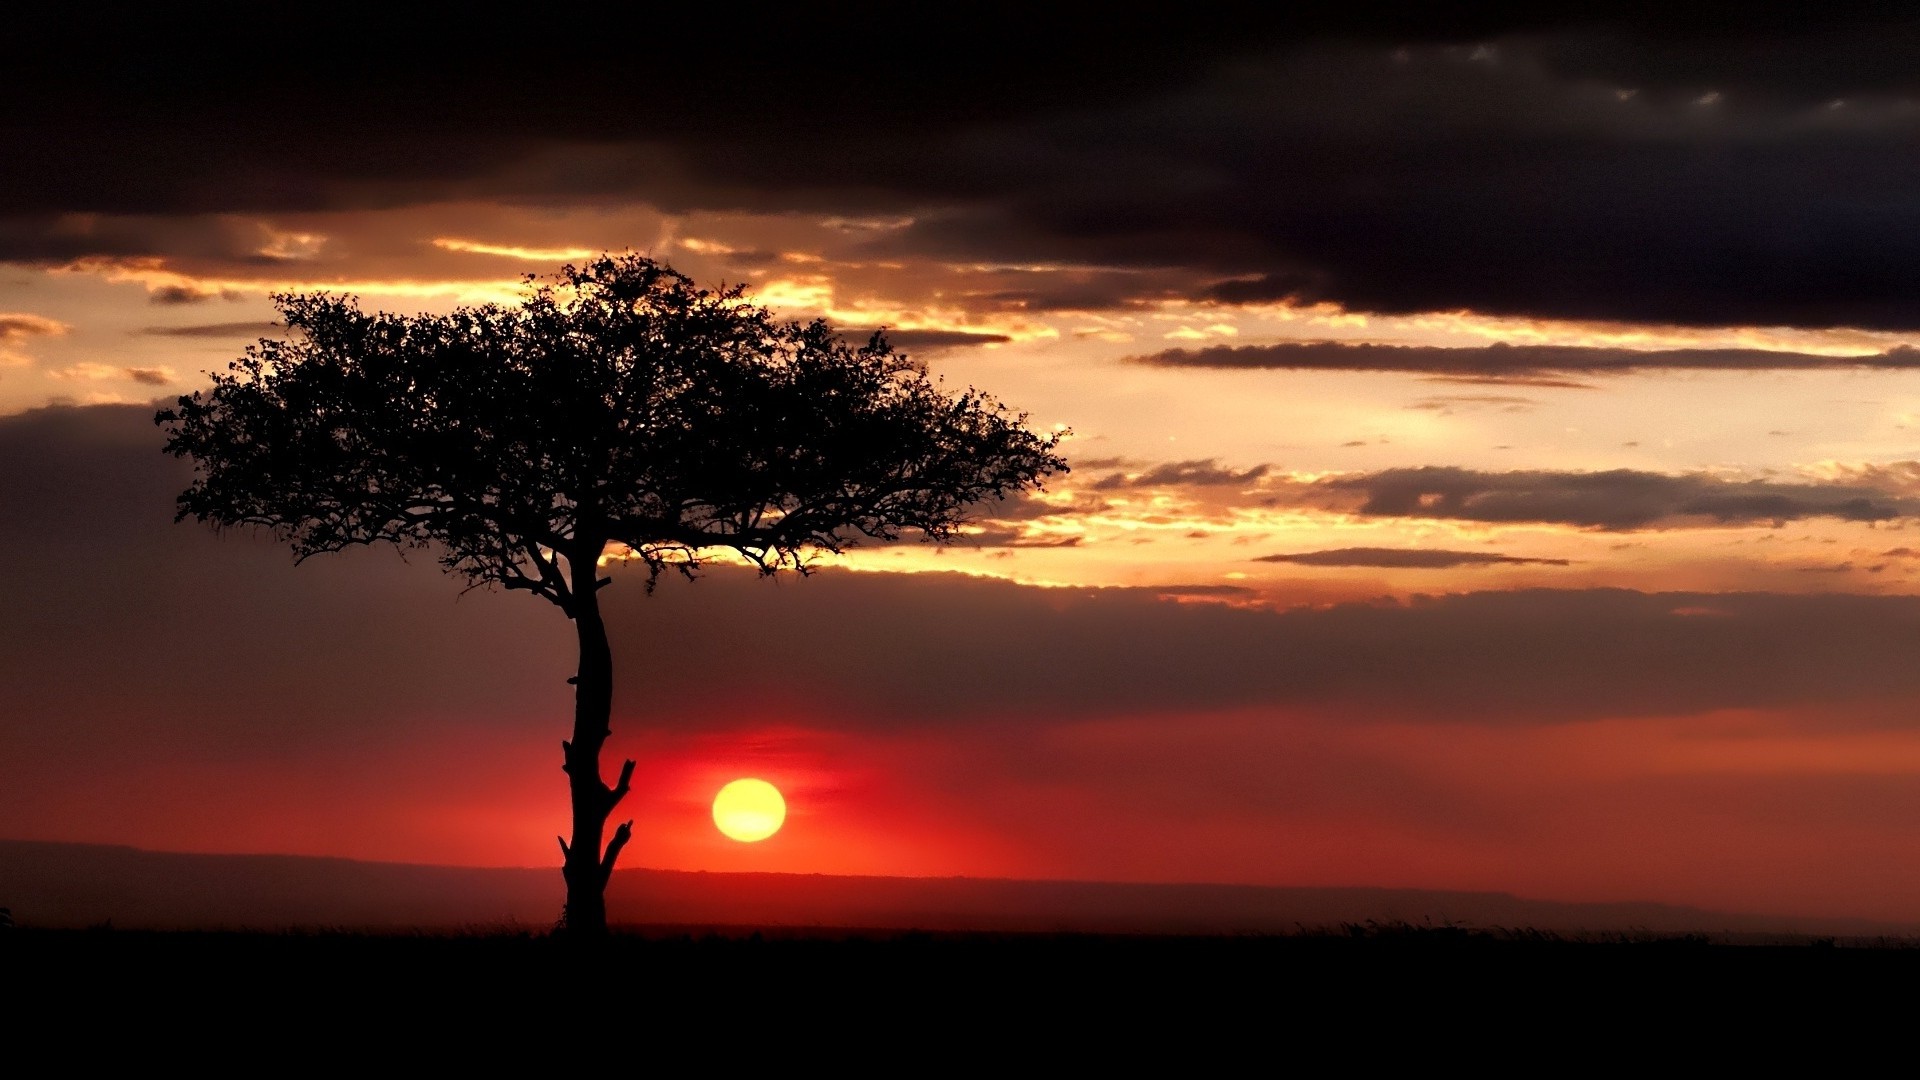 1920x1080 wallpapers: savannah, tree, lonely, the sun, evening (image)